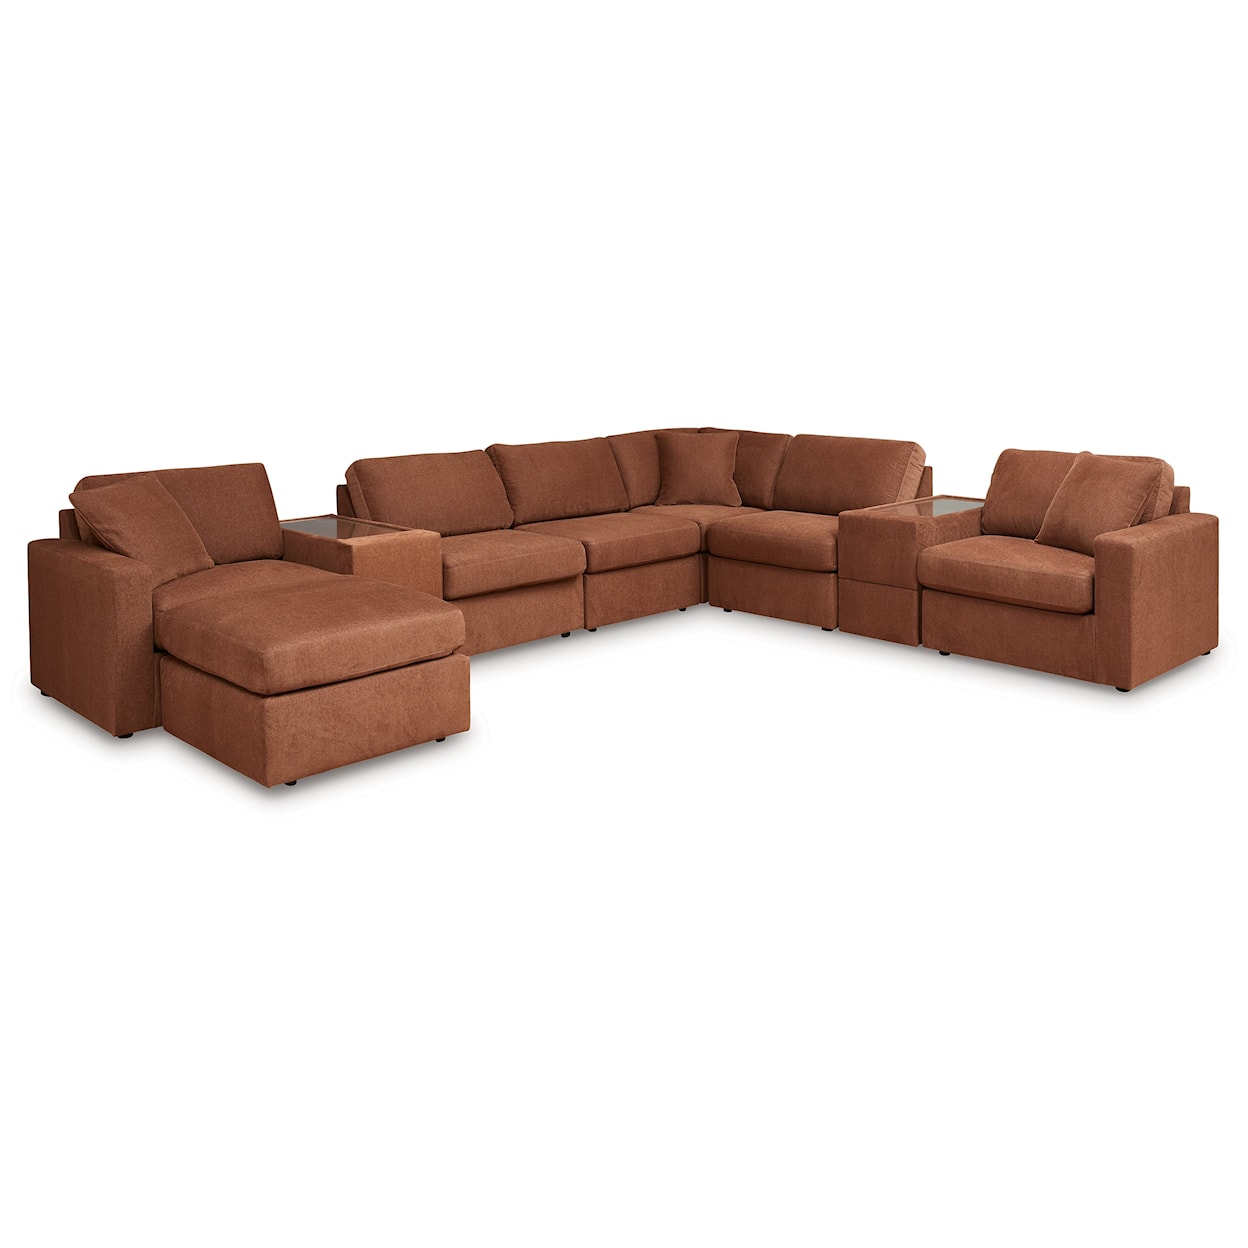 Signature Design by Ashley Modmax 8-Piece Sectional